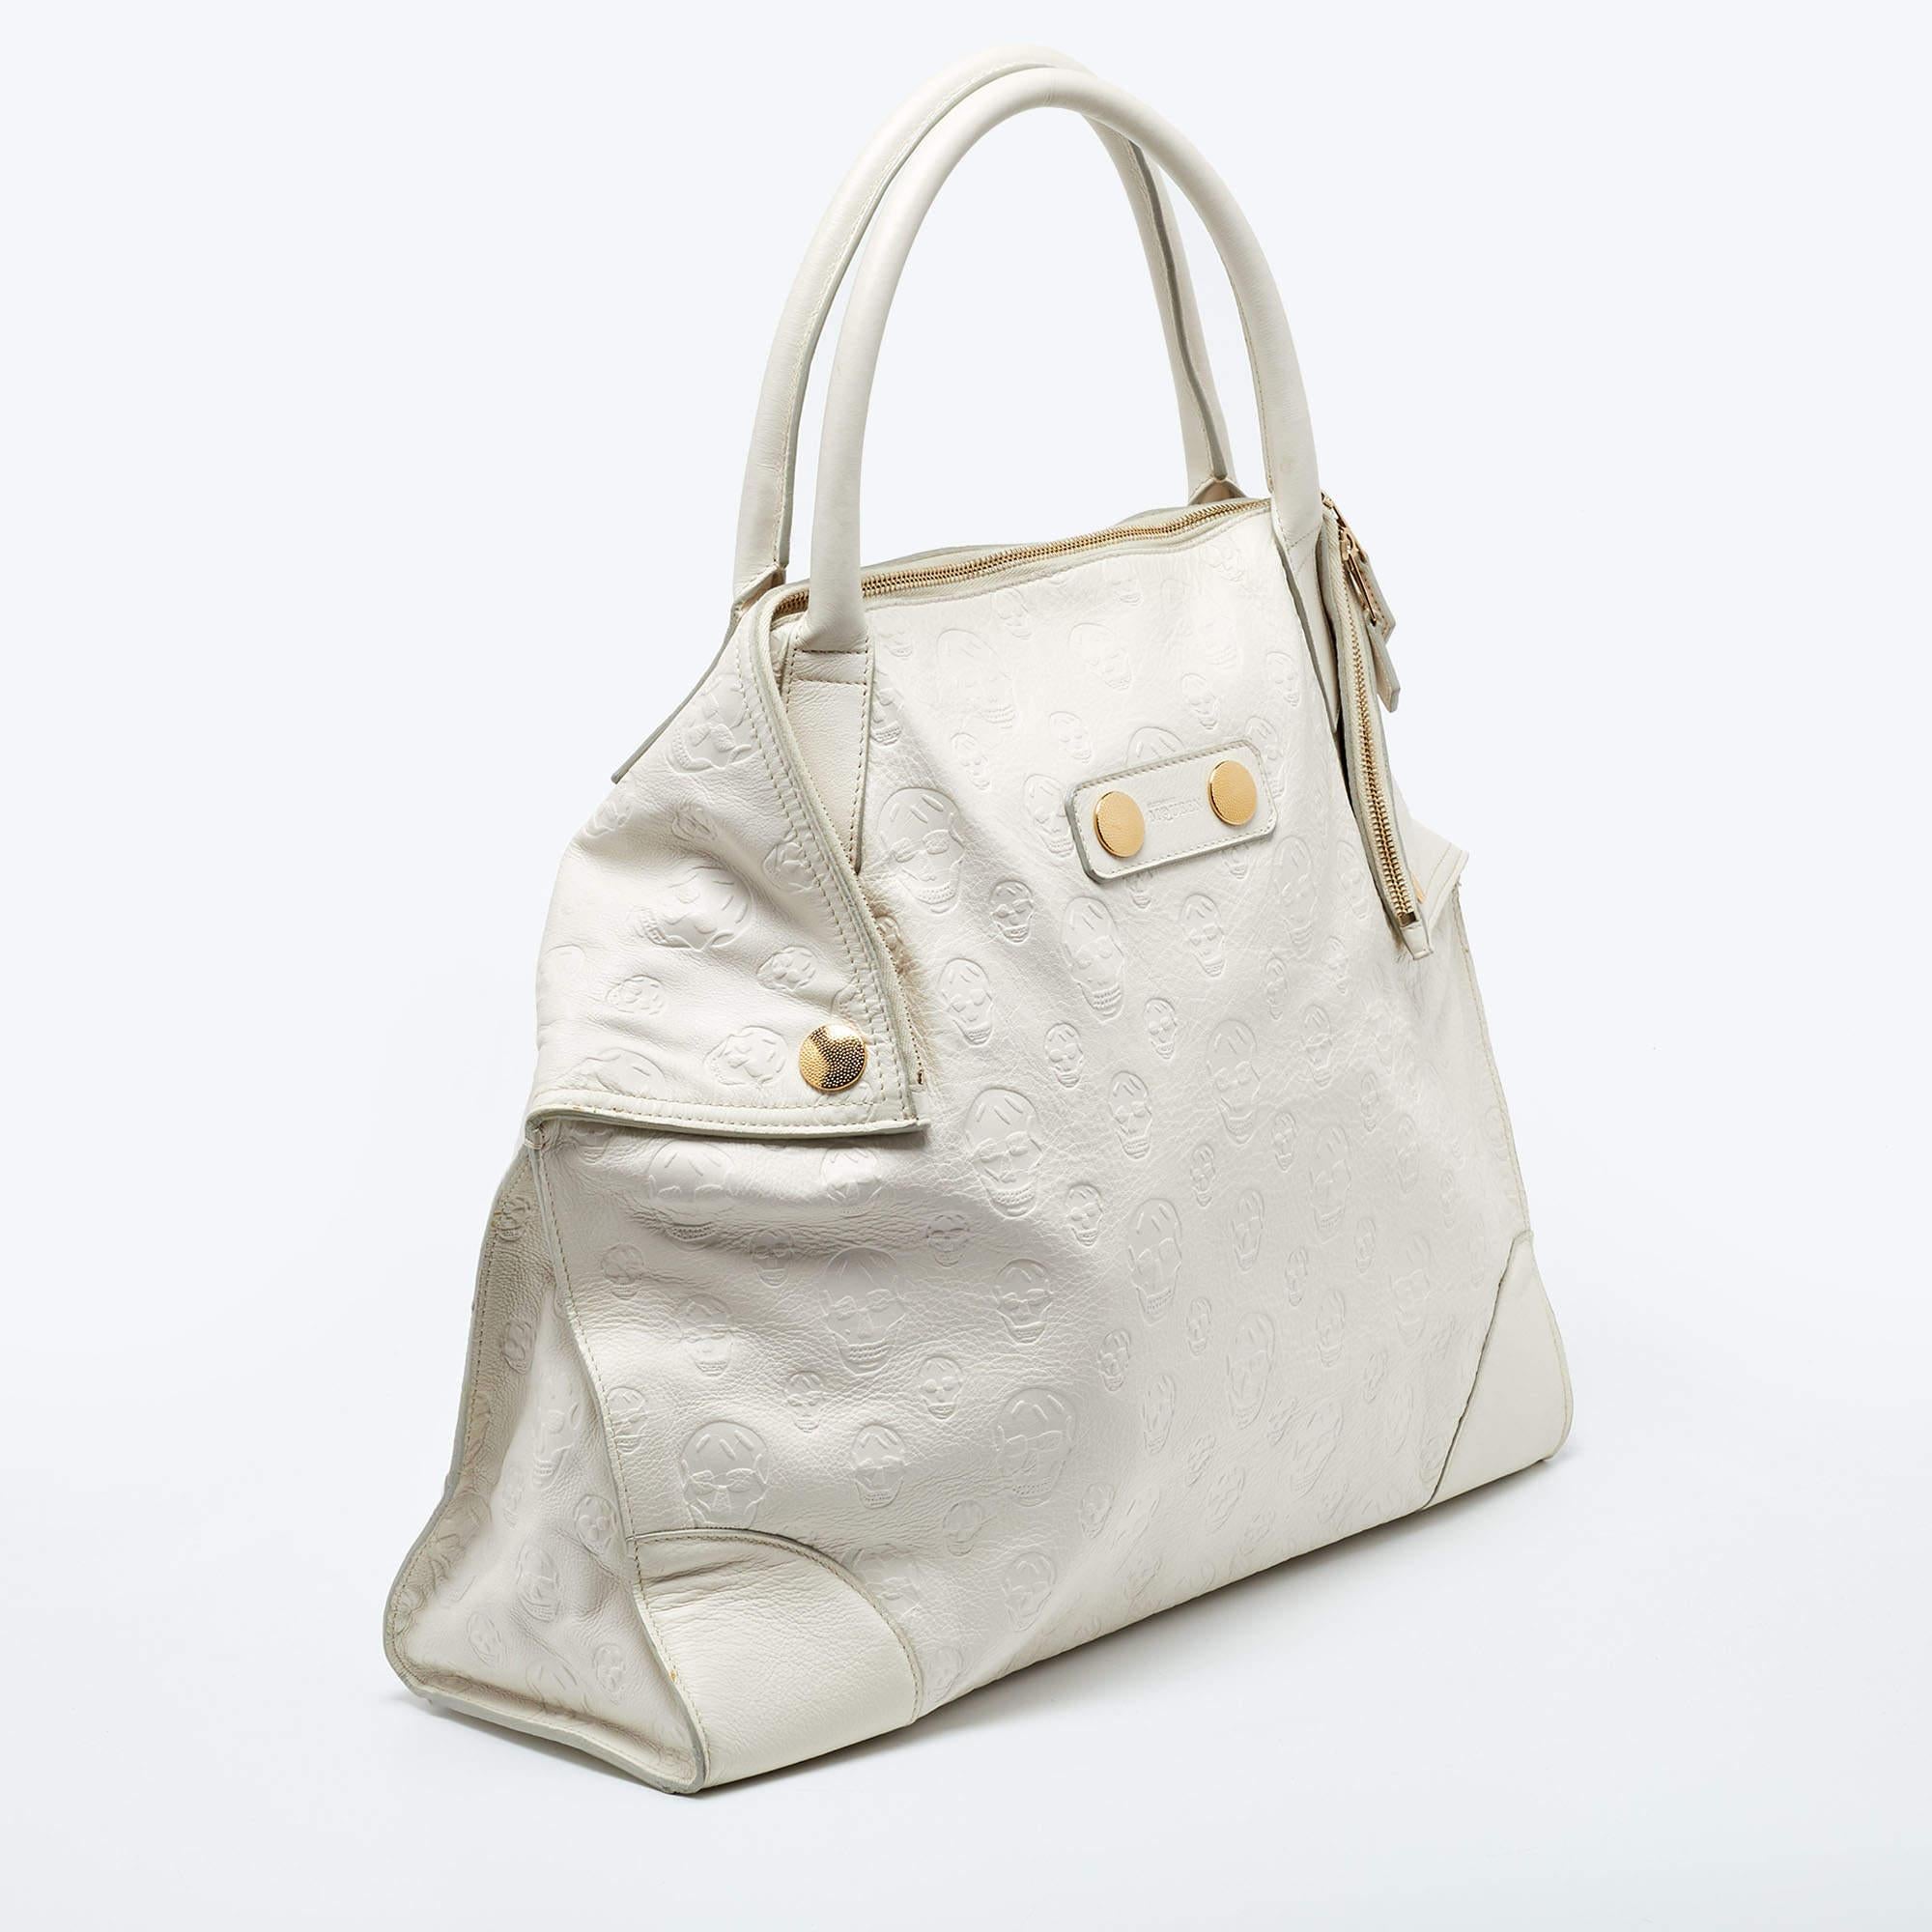 Add a shimmery touch to your outfit with this uniquely shaped yet elegant De Manta tote by Alexander McQueen. The exterior is made from off-white leather, accented with gold-tone metal studs on the front. It features fold up ends and a zipped